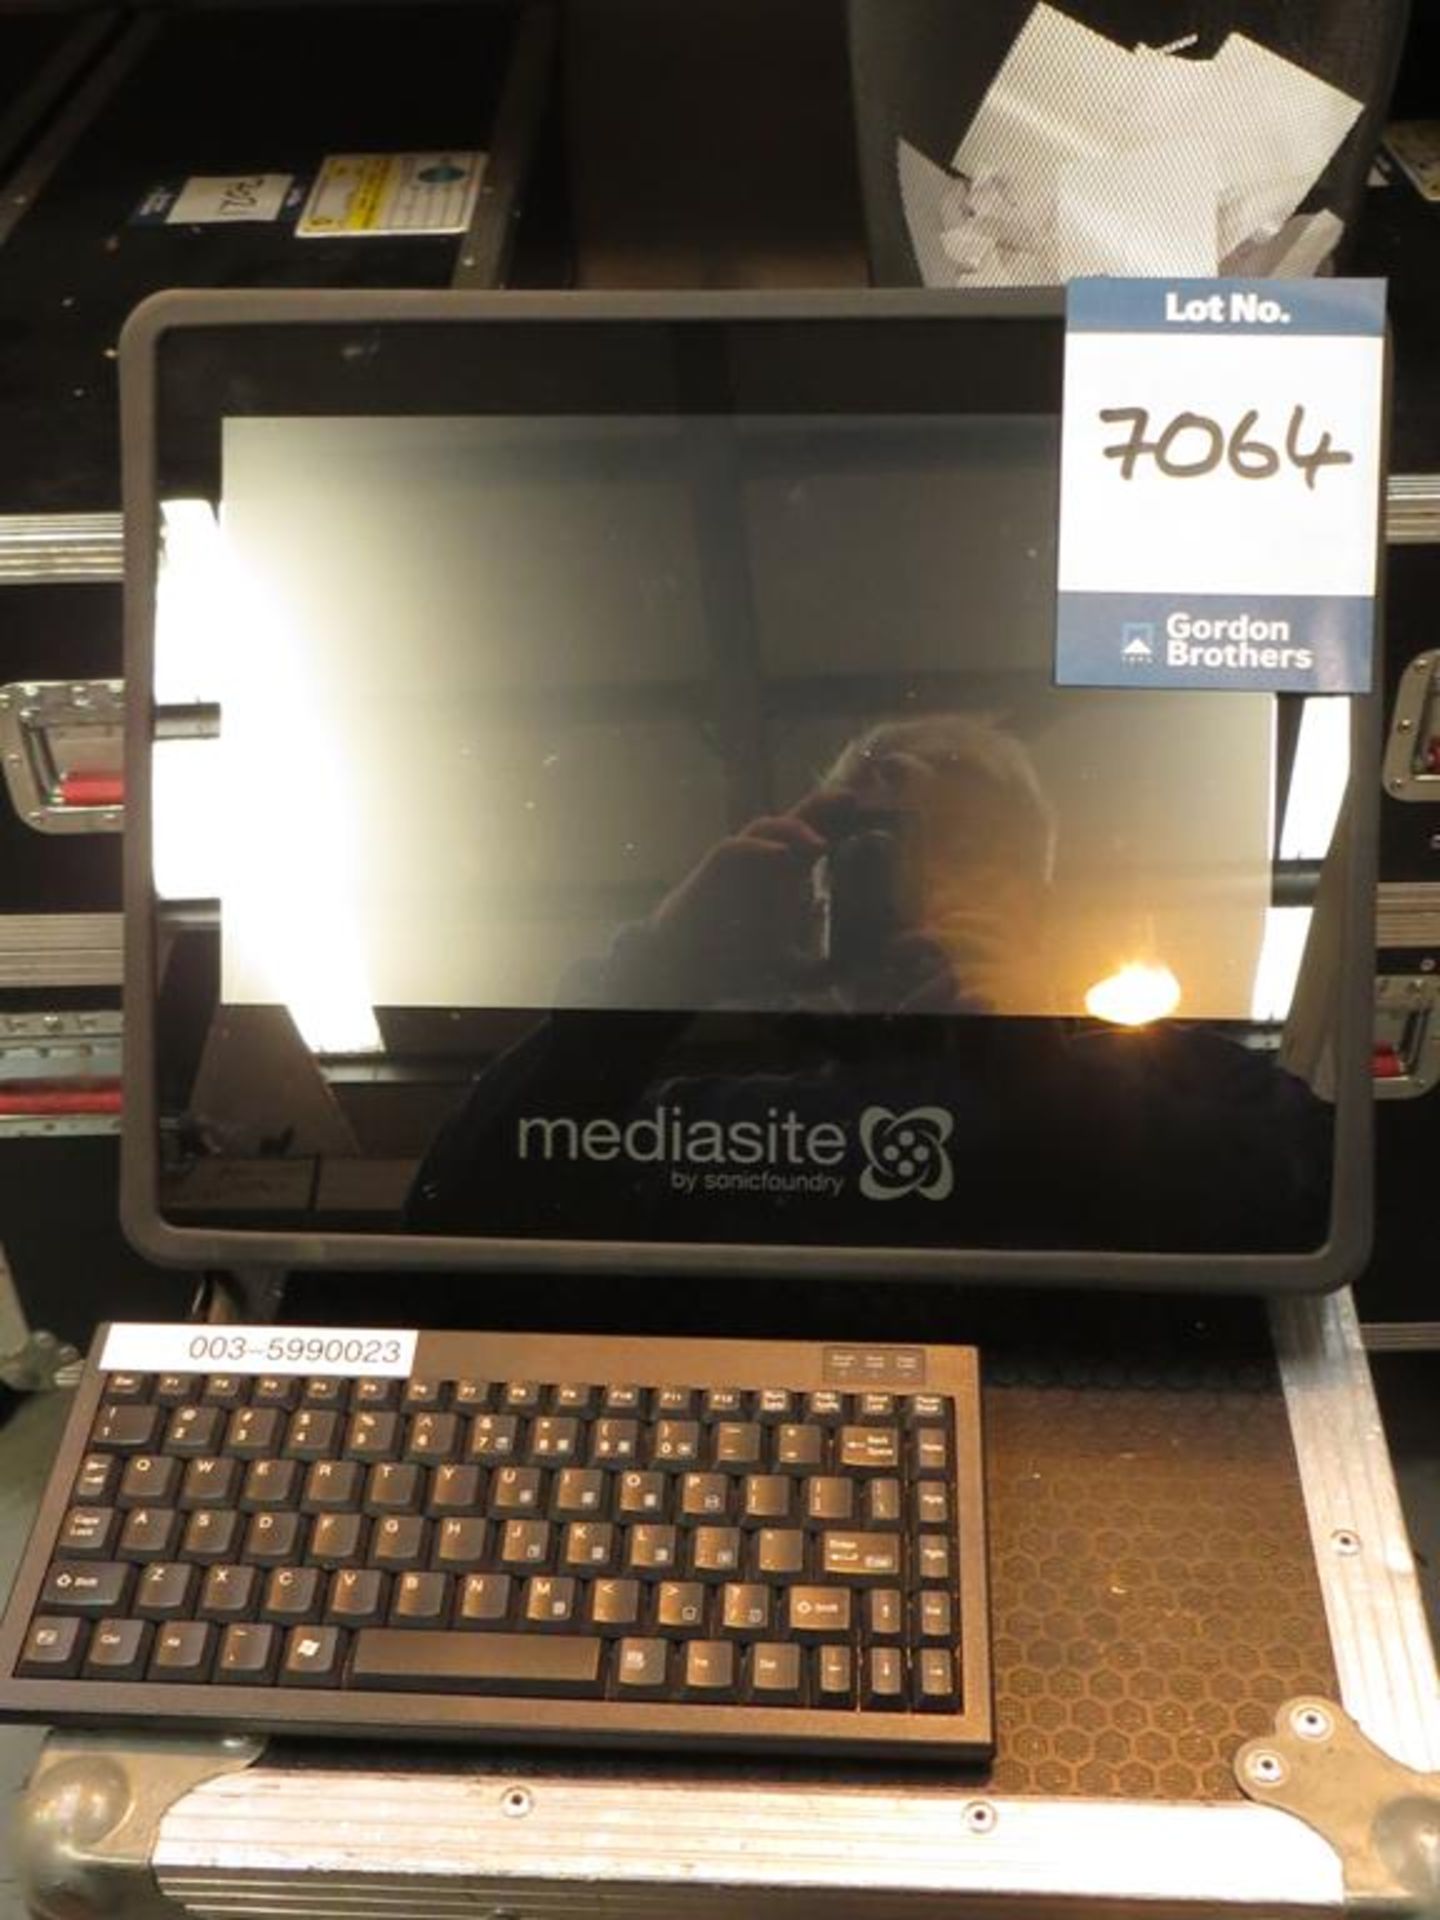 Sonic Foundry, Mediasite HD web/live streaming system, Model MSL-CSL-820R2, Serial No. 0035990023 in